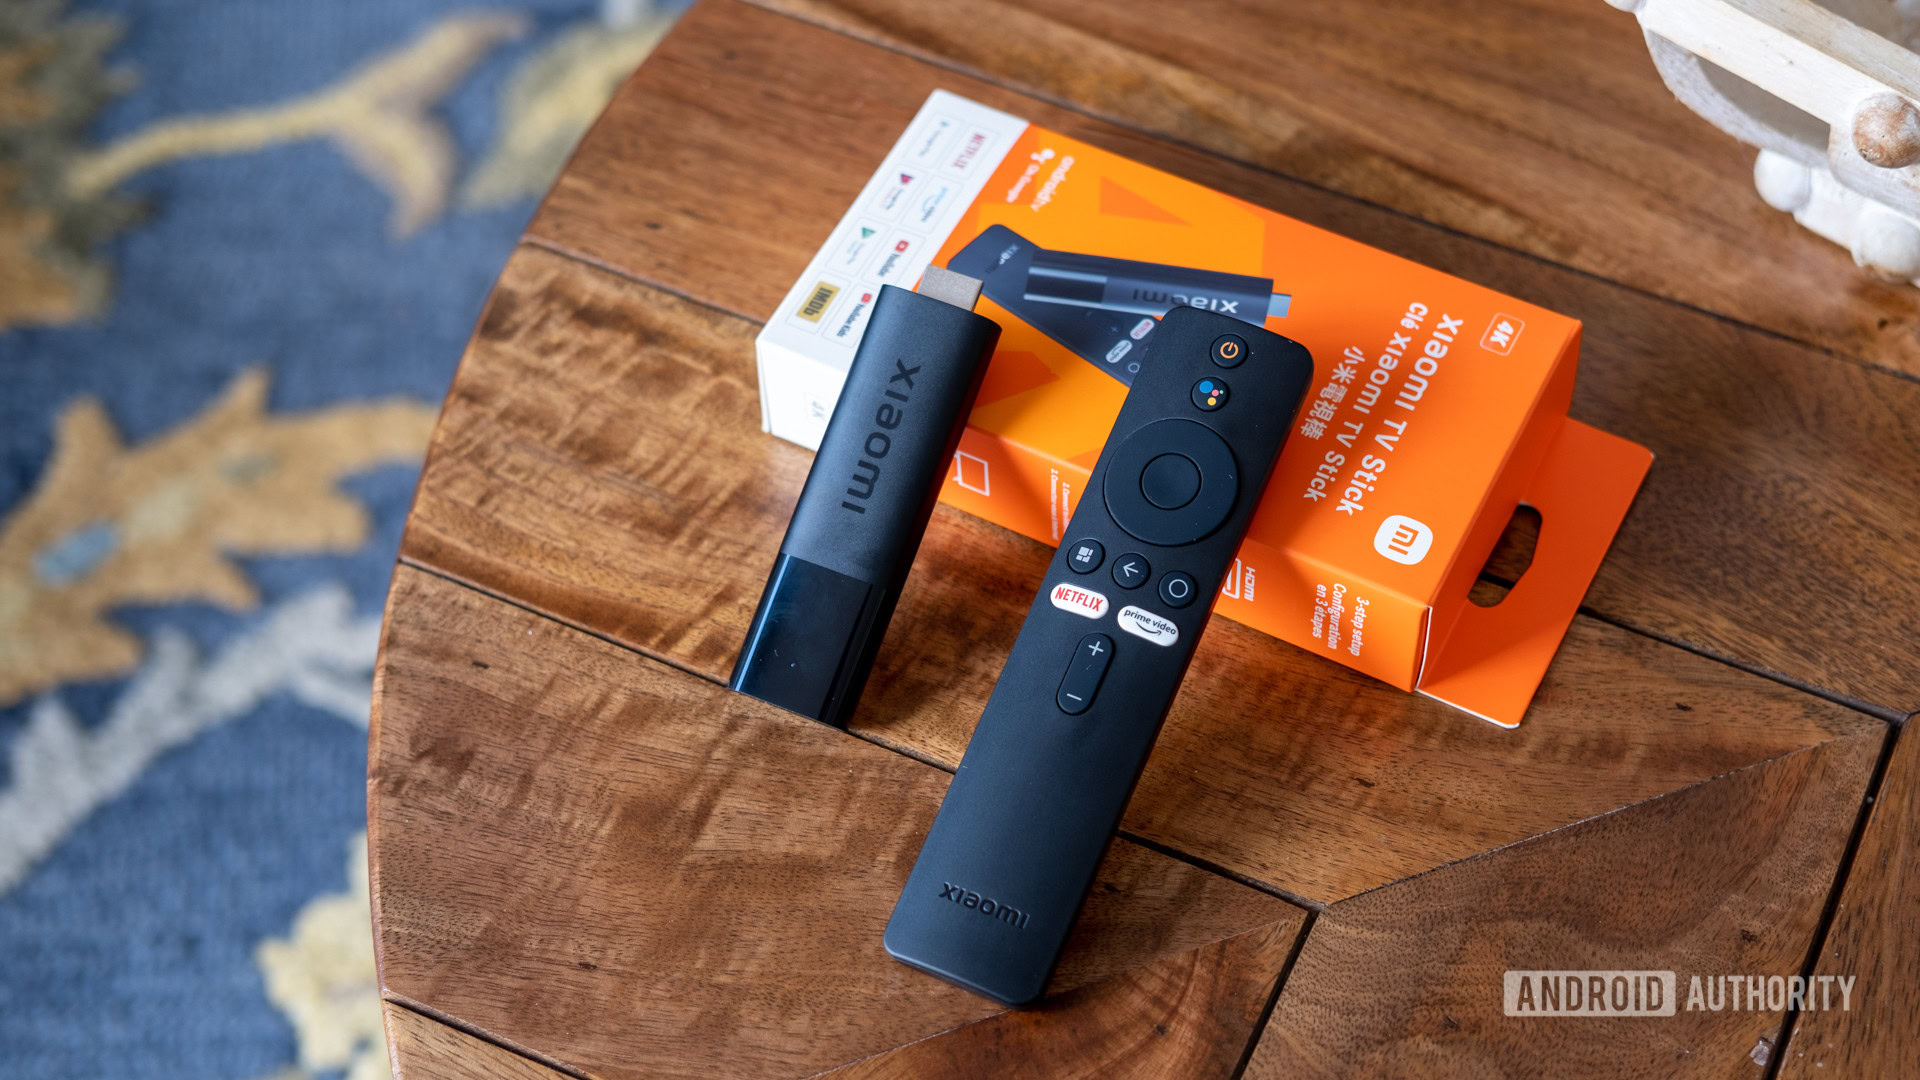 https://www.androidauthority.com/wp-content/uploads/2022/01/xiaomi-tv-stick-and-remote-on-box.jpg